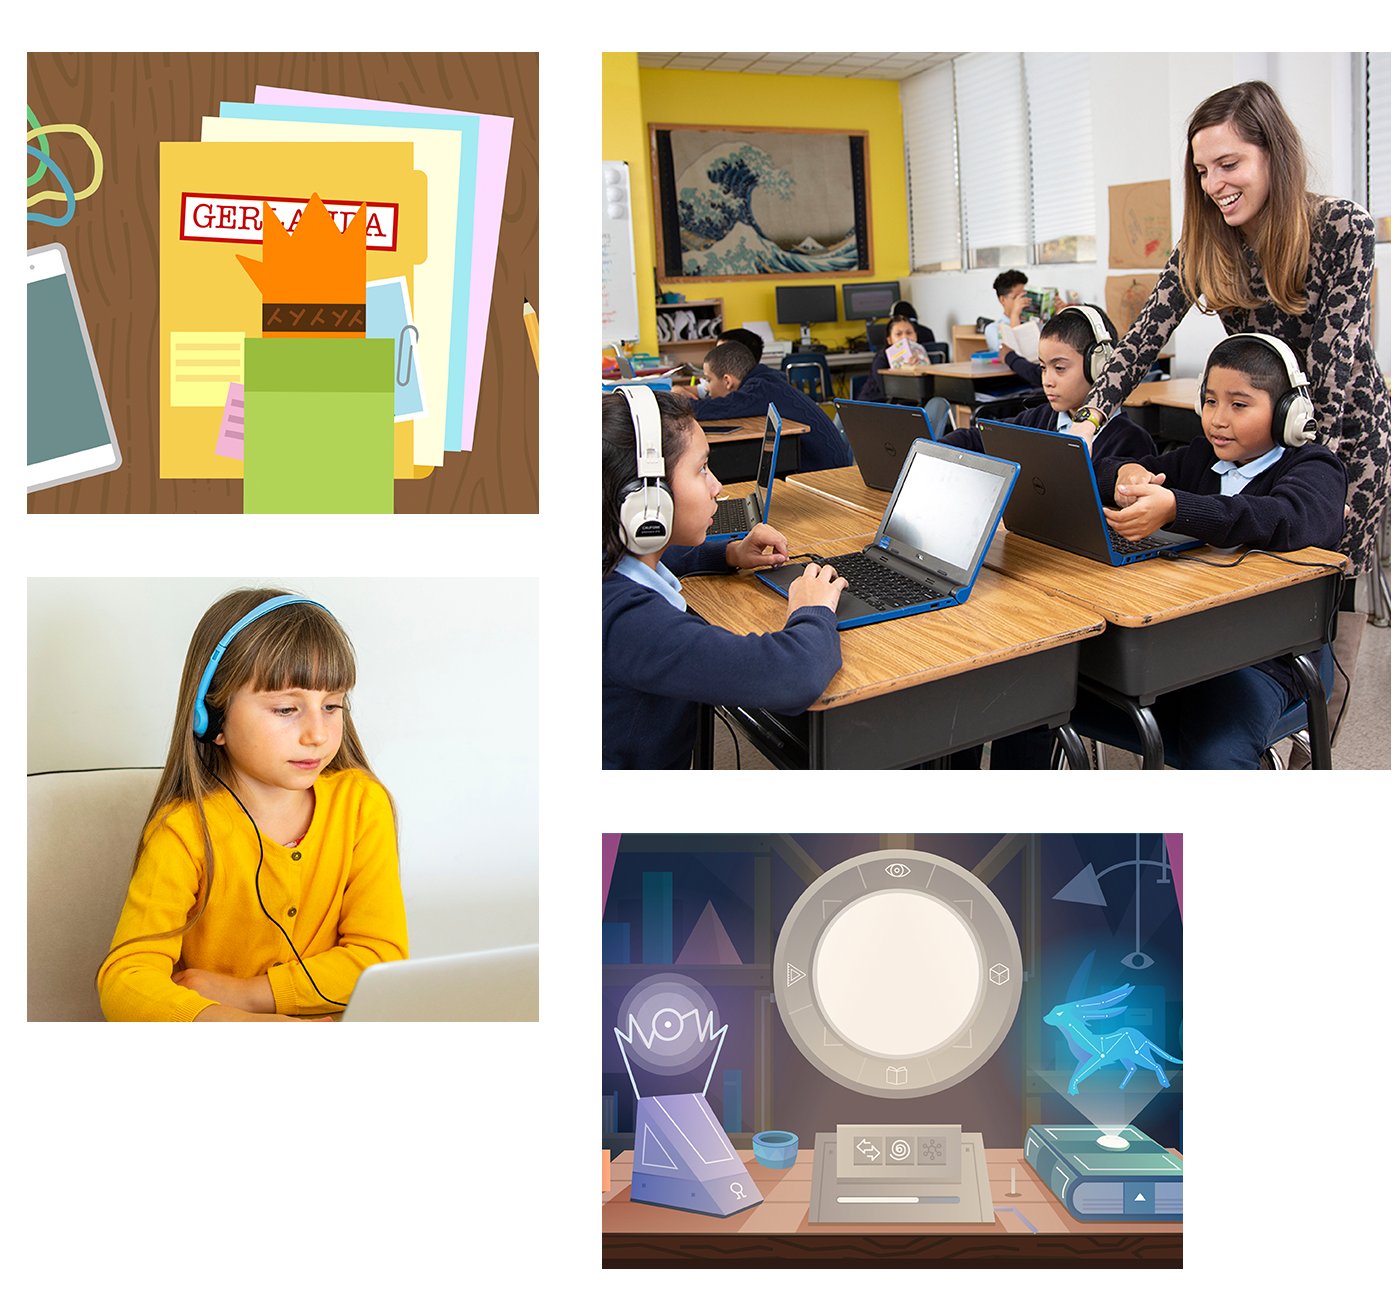 Collage of four educational settings: books and devices graphics for the Boost Reading program, a teacher assisting children in a classroom, a girl learning on a laptop, and an illustration of digital learning tools.